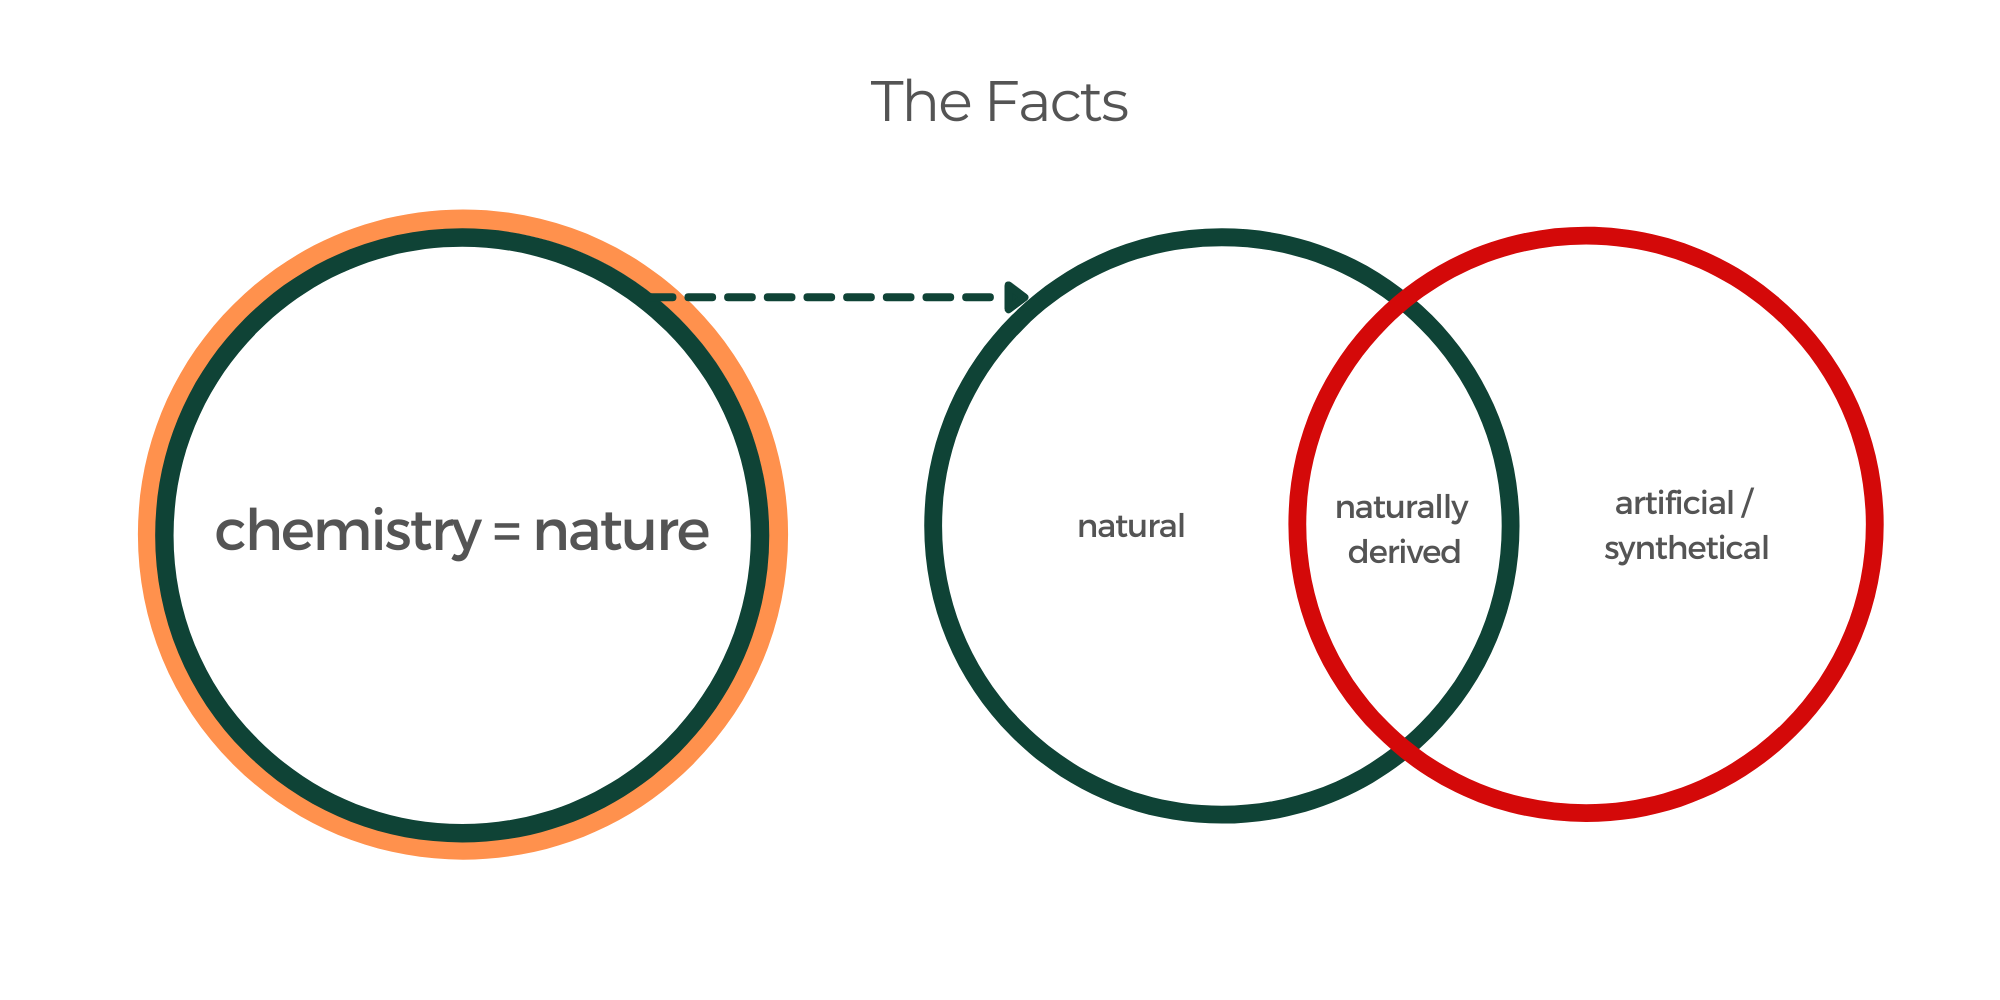 The figure shows two fully overlapping circles on the left side, illustrating the intrinsic relationship between nature and chemistry. The Venn diagram on the right side shows the intersection of natural and artificial/synthetical products that form naturally derived products.